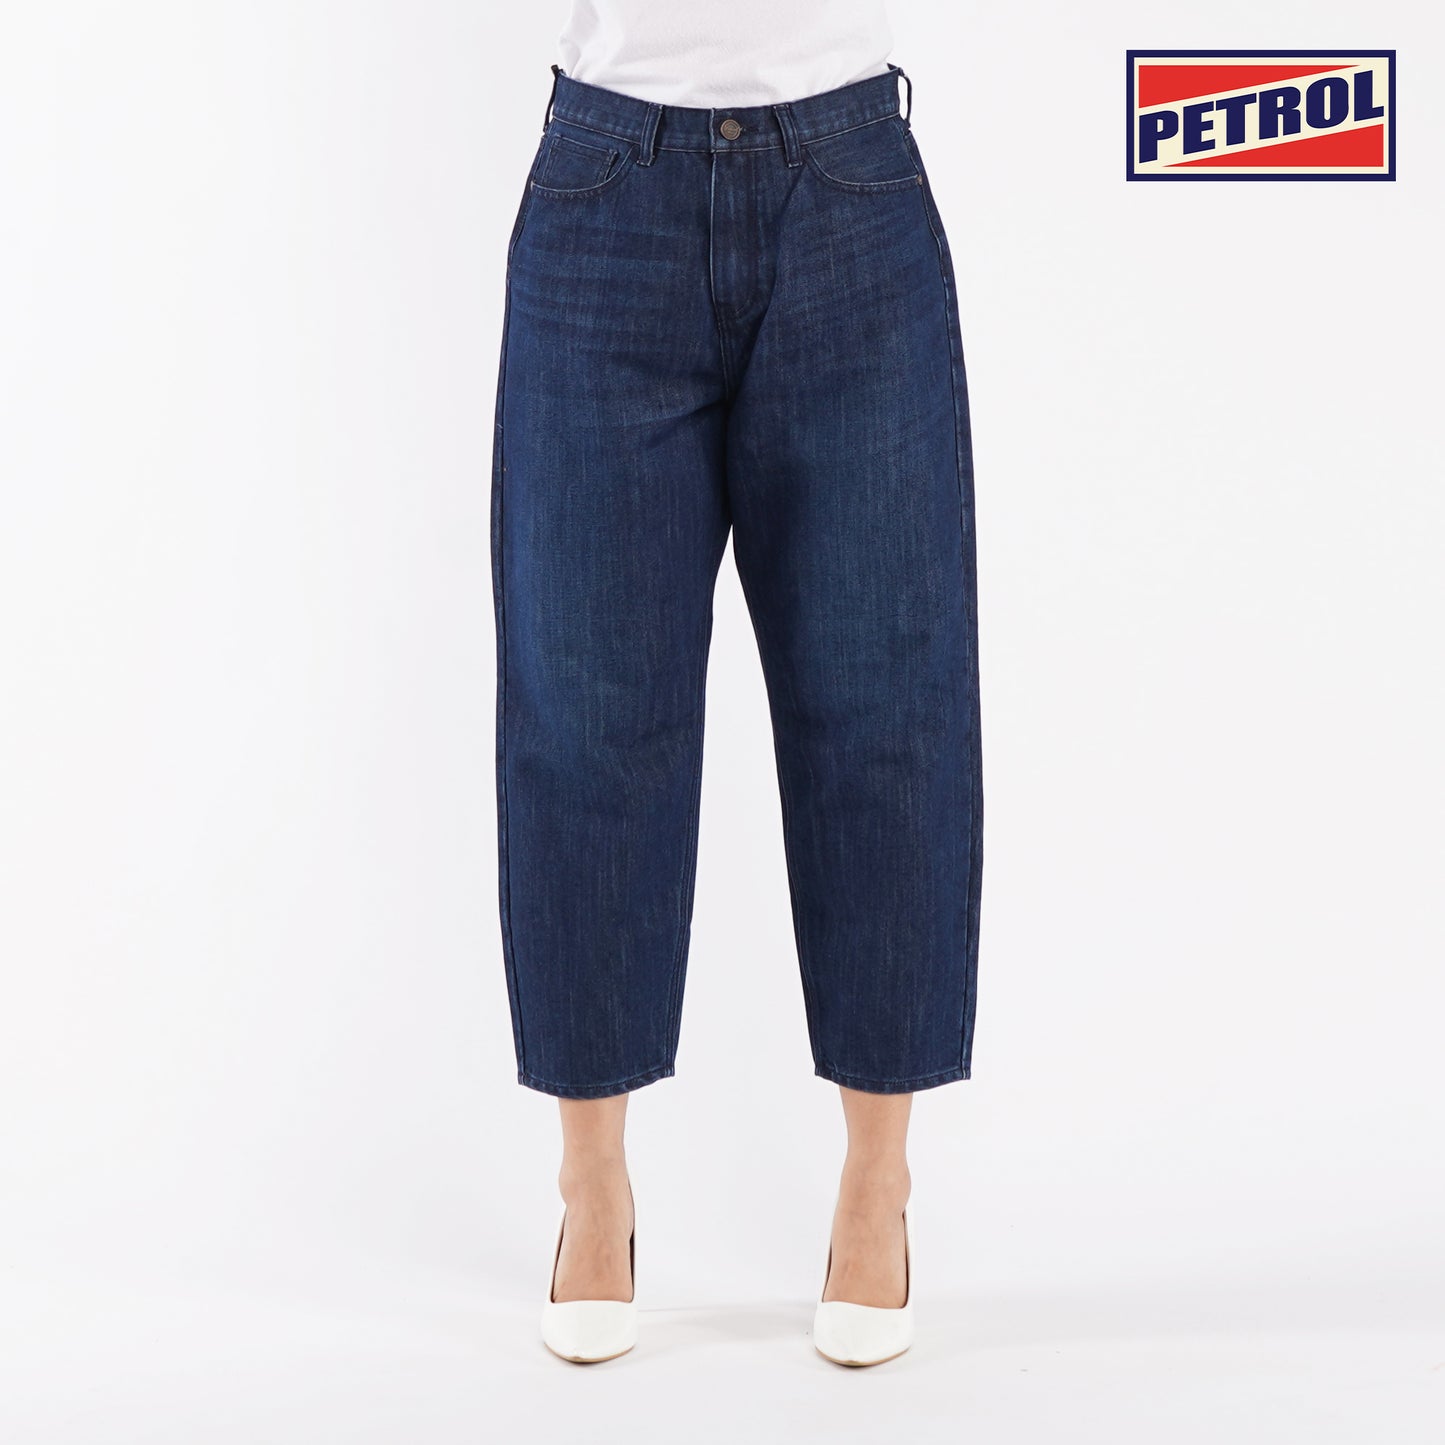 Petrol Ladies Basic Denim Fashionable Casual Apparel Maong Pants For Women High Waisted Balloon Fit Denim Jeans Trendy Fashion High Quality Jeans For Women 148012 (Dark Shade)